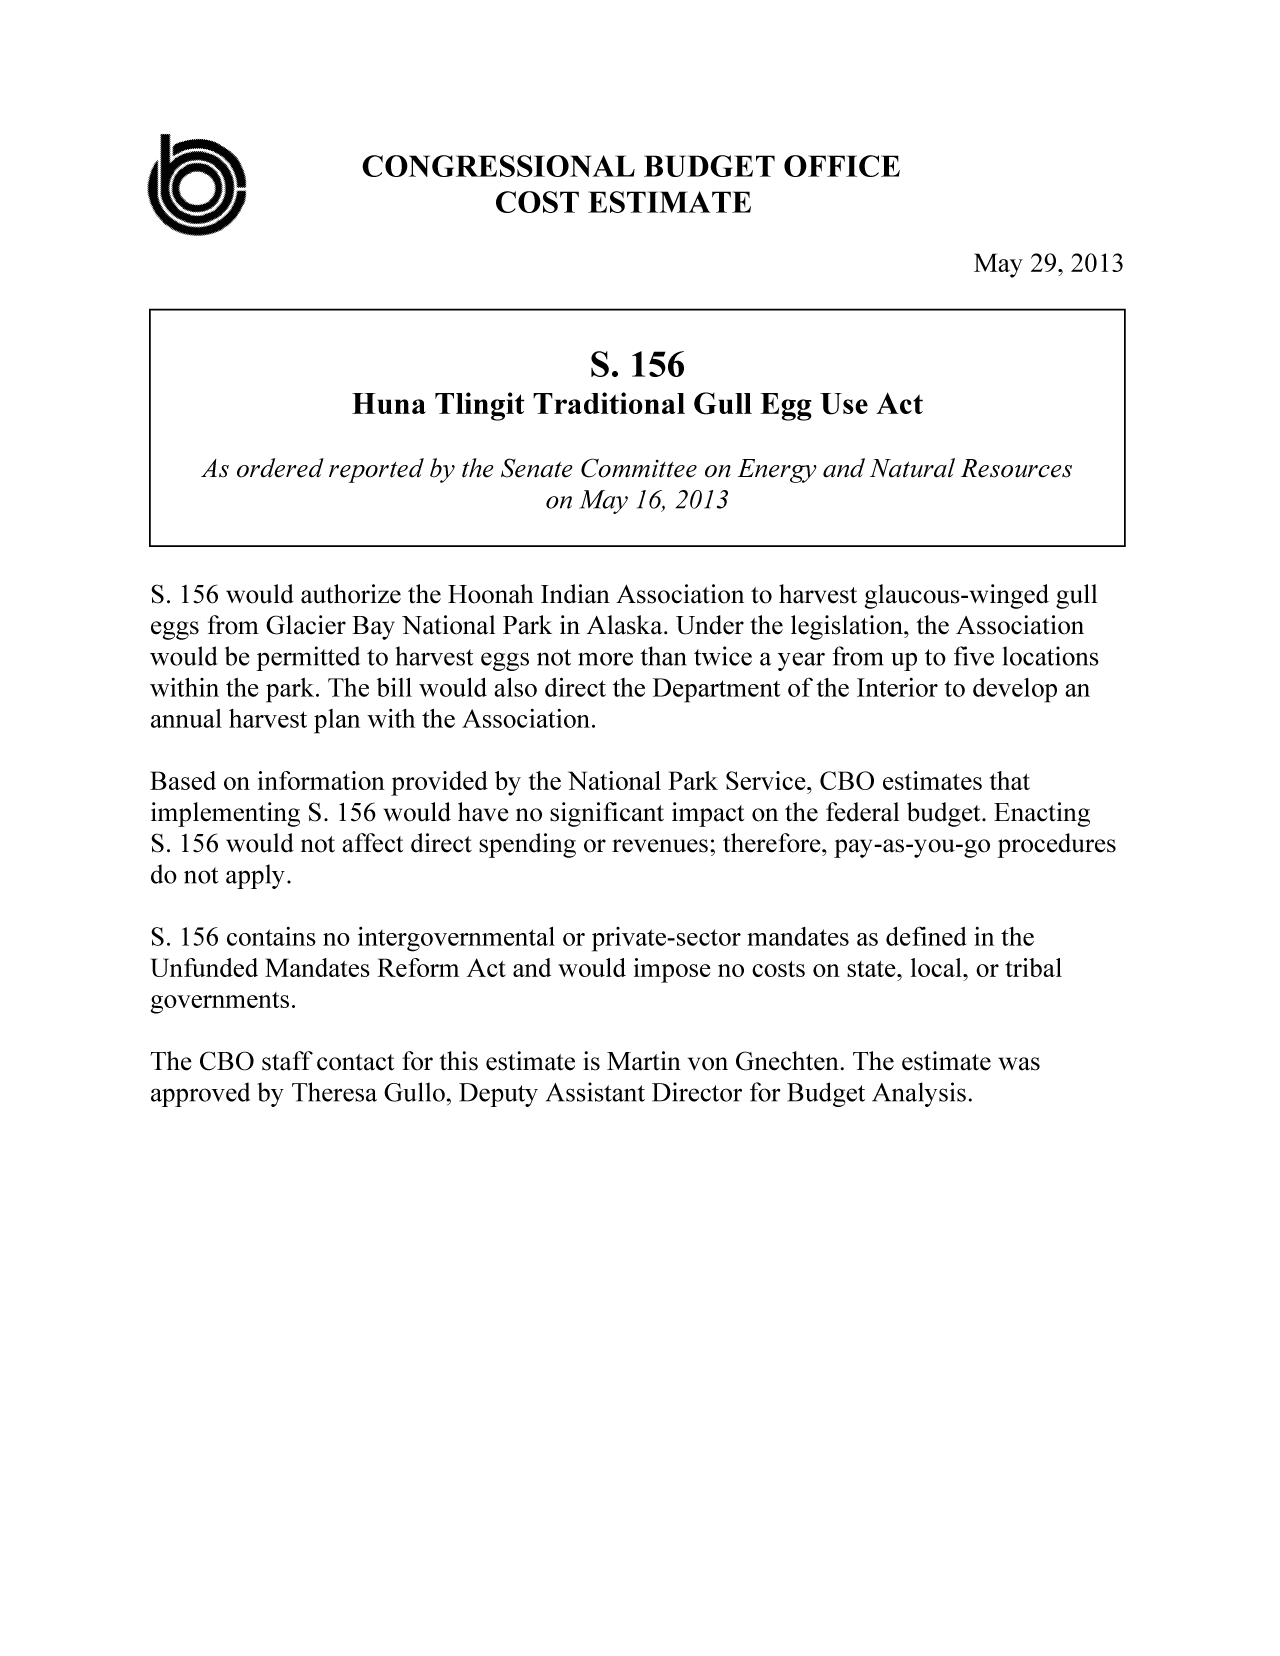 handle is hein.congrec/cbo11121 and id is 1 raw text is: CONGRESSIONAL BUDGET OFFICE
COST ESTIMATE
May 29, 2013
S. 156
Huna Tlingit Traditional Gull Egg Use Act
As ordered reported by the Senate Committee on Energy and Natural Resources
on May 16, 2013
S. 156 would authorize the Hoonah Indian Association to harvest glaucous-winged gull
eggs from Glacier Bay National Park in Alaska. Under the legislation, the Association
would be permitted to harvest eggs not more than twice a year from up to five locations
within the park. The bill would also direct the Department of the Interior to develop an
annual harvest plan with the Association.
Based on information provided by the National Park Service, CBO estimates that
implementing S. 156 would have no significant impact on the federal budget. Enacting
S. 156 would not affect direct spending or revenues; therefore, pay-as-you-go procedures
do not apply.
S. 156 contains no intergovernmental or private-sector mandates as defined in the
Unfunded Mandates Reform Act and would impose no costs on state, local, or tribal
governments.
The CBO staff contact for this estimate is Martin von Gnechten. The estimate was
approved by Theresa Gullo, Deputy Assistant Director for Budget Analysis.


